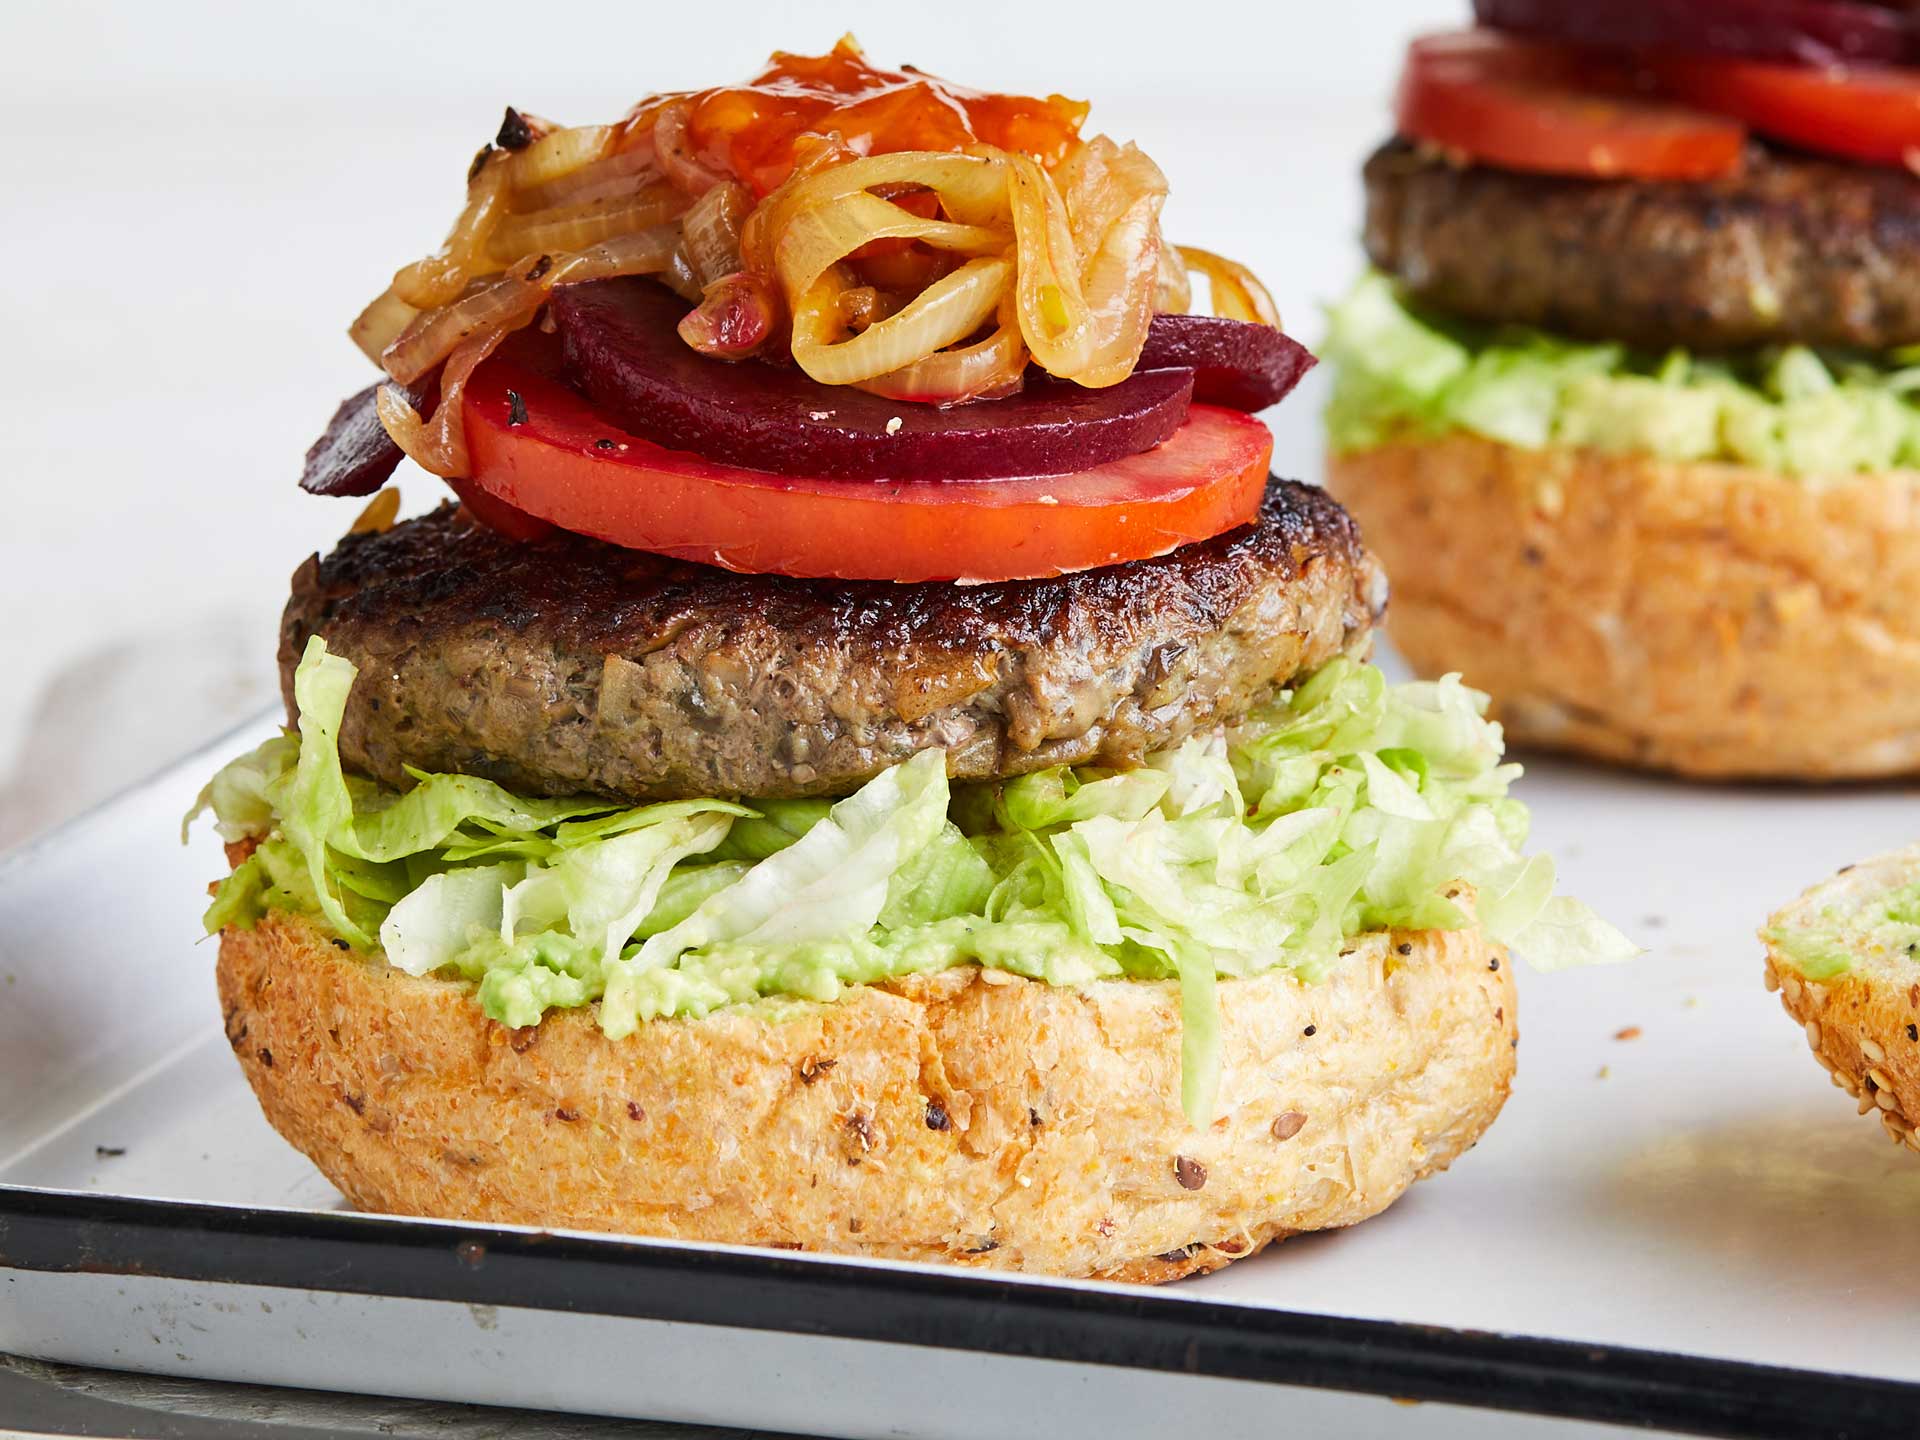 Beef burger from the quick, easy, delicious recipes e-book